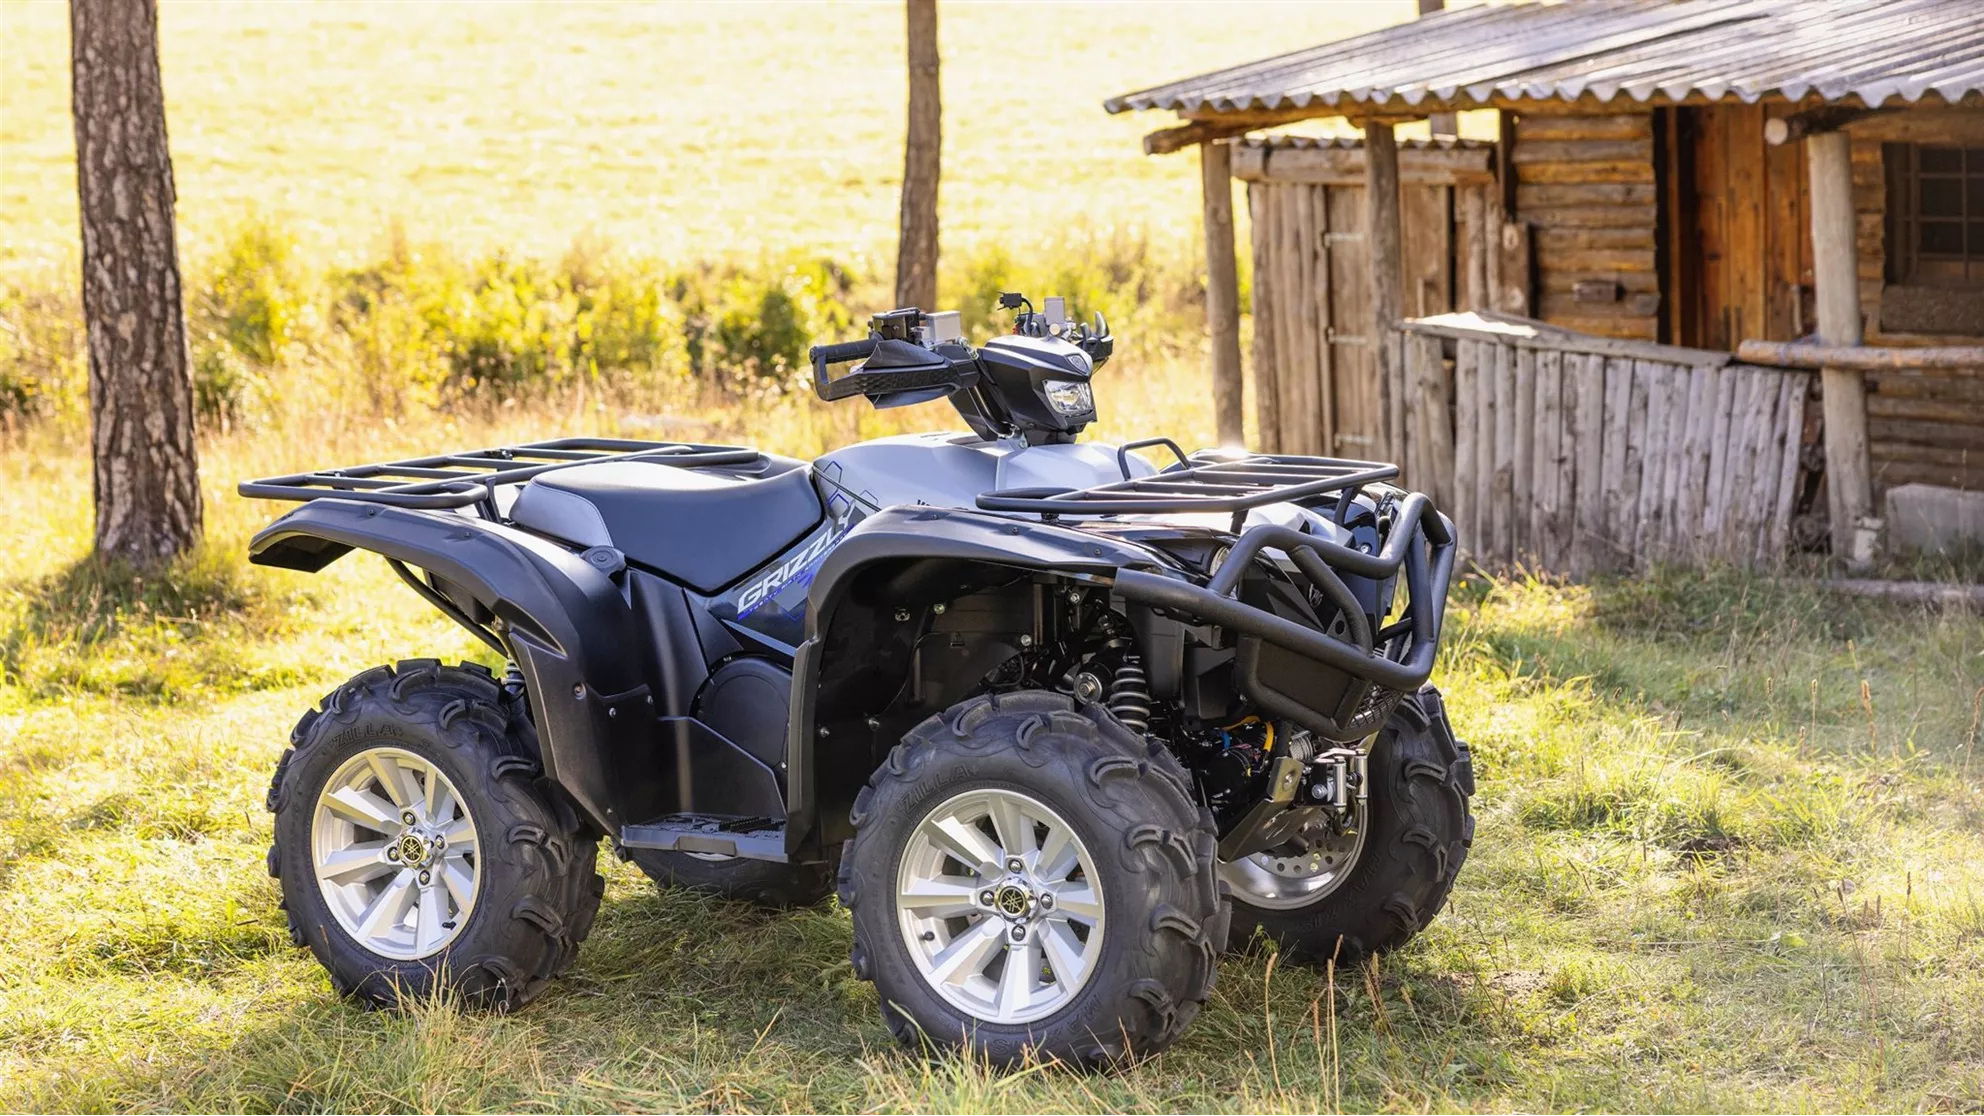 Yamaha Grizzly 700 25th Anniversary - Image 9